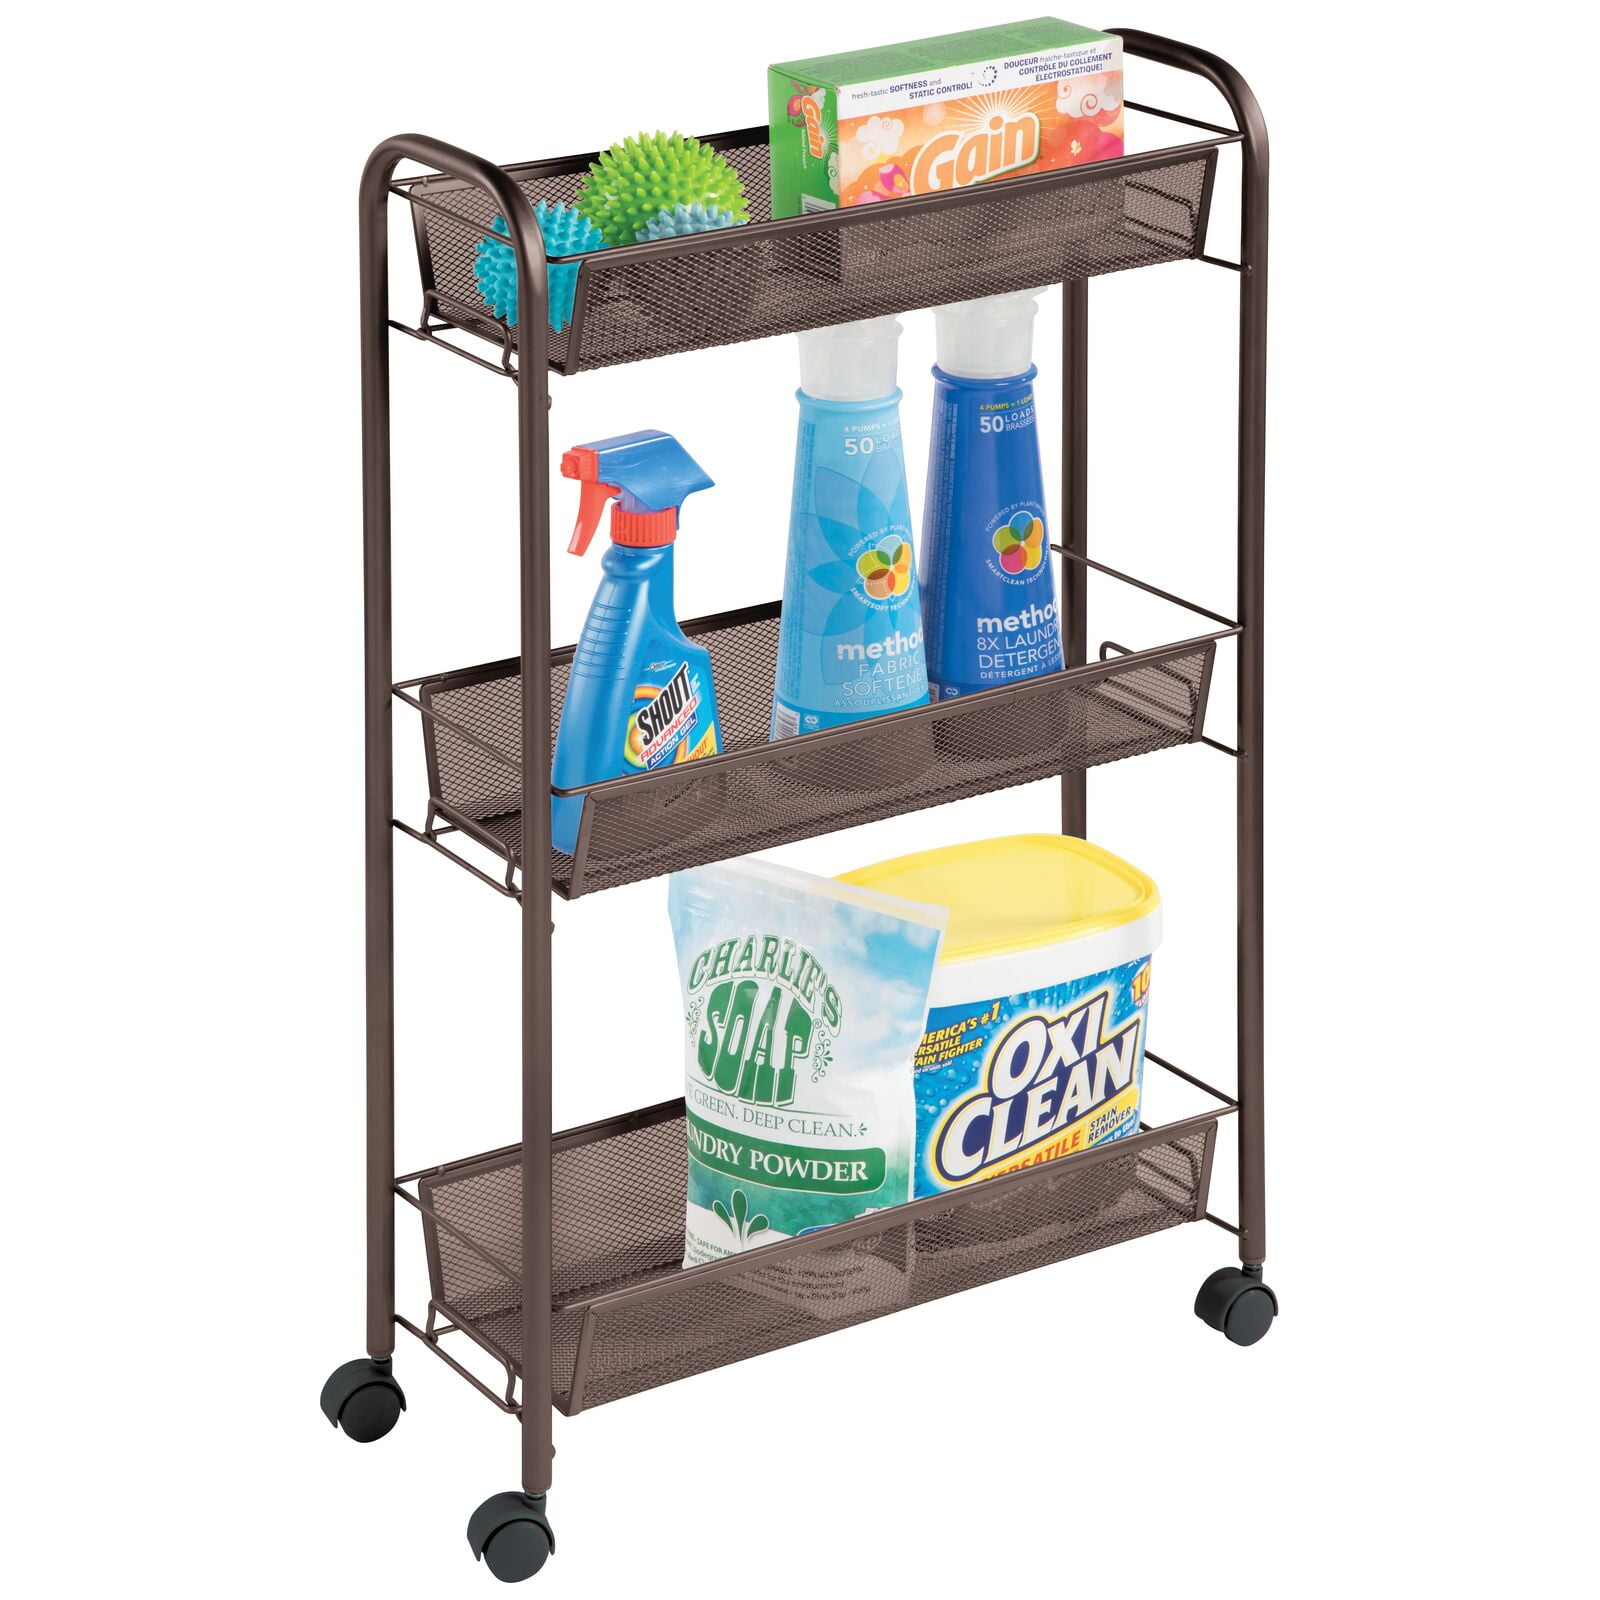 Portable Storage Organizer Trolley mDesign Slim Plastic Rolling Laundry Utility Cart Gray Kitchen or Pantry Storage Utility Room Easy-Glide Wheels and 3 Heavy-Duty Shelves for Laundry 